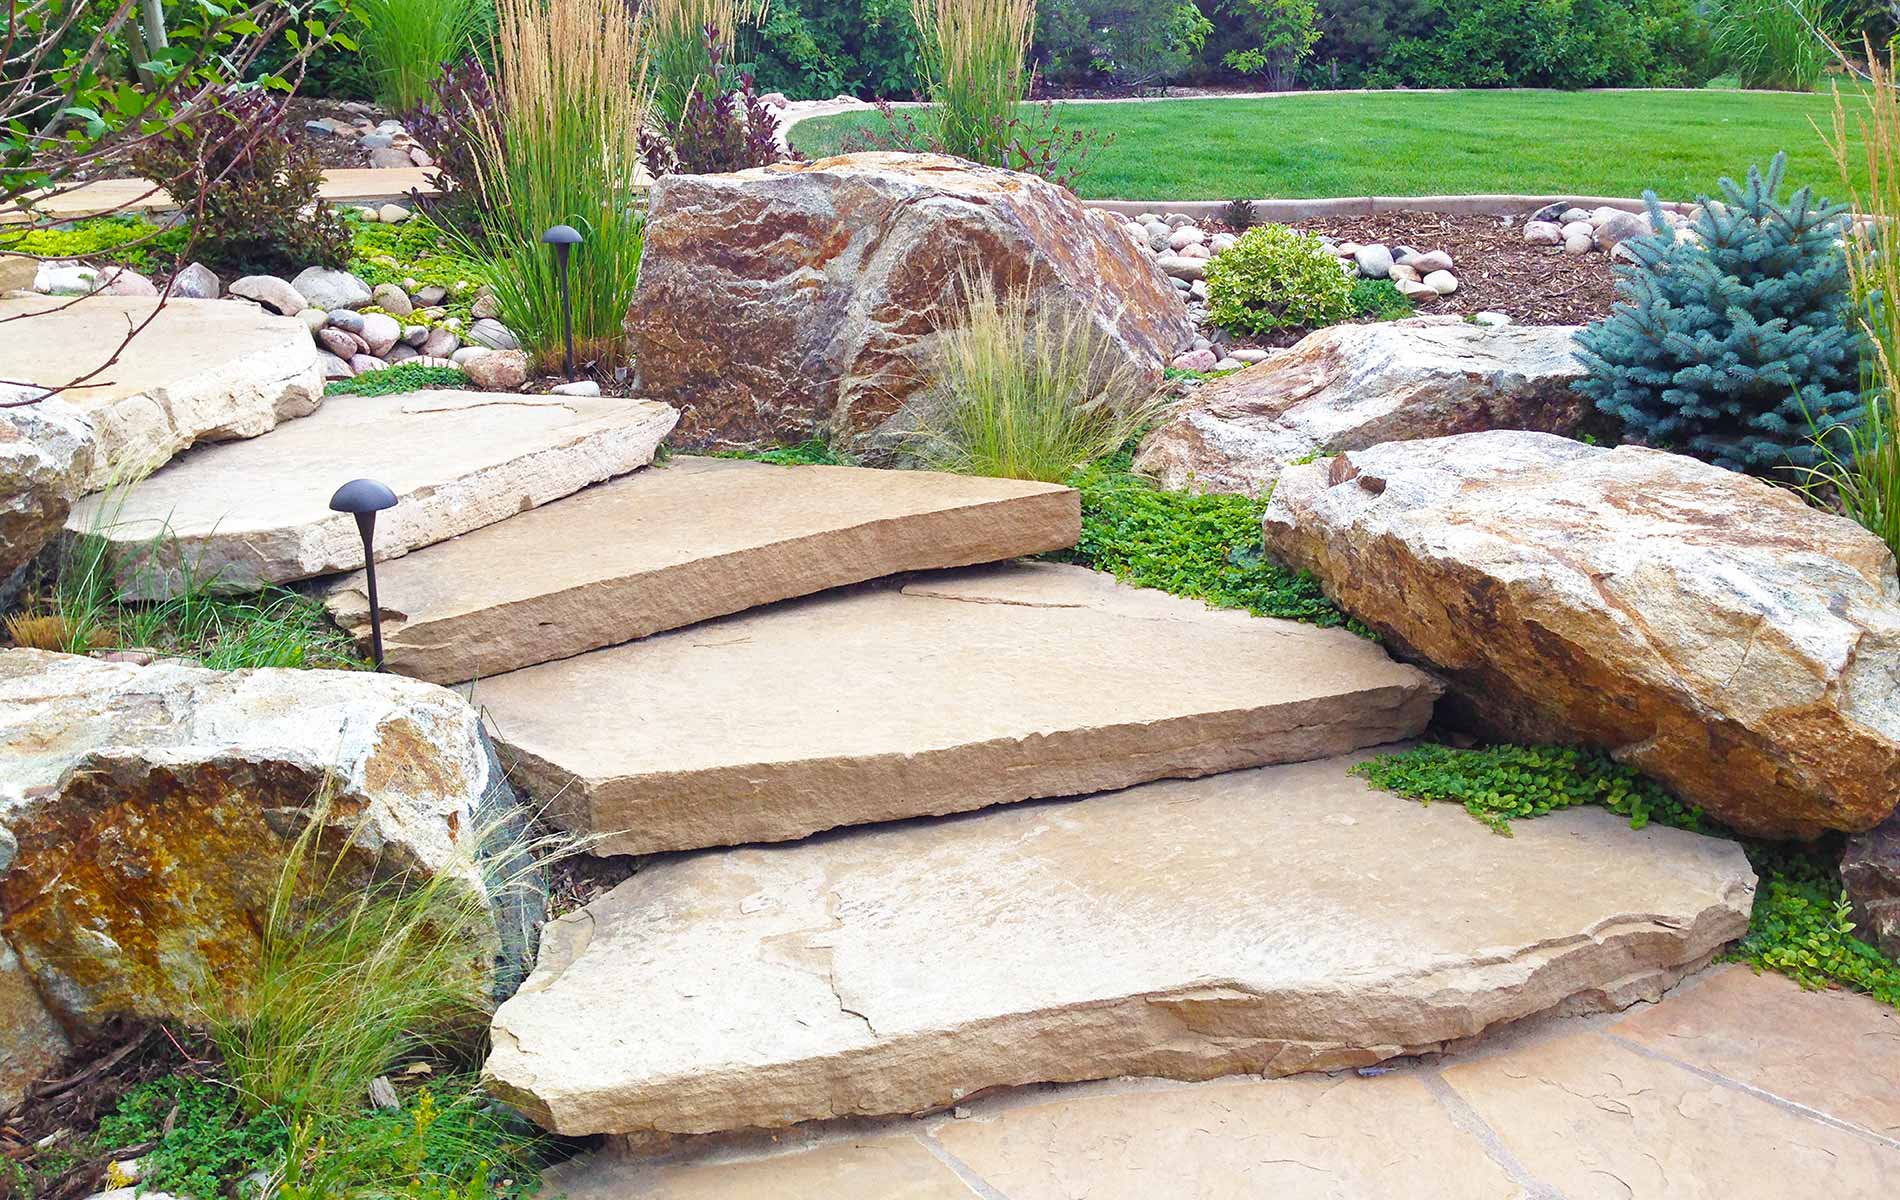 Twisting stone stairs and large boulders in Rustic Outdoor Living in Arvada Mile High Landscaping in Denver